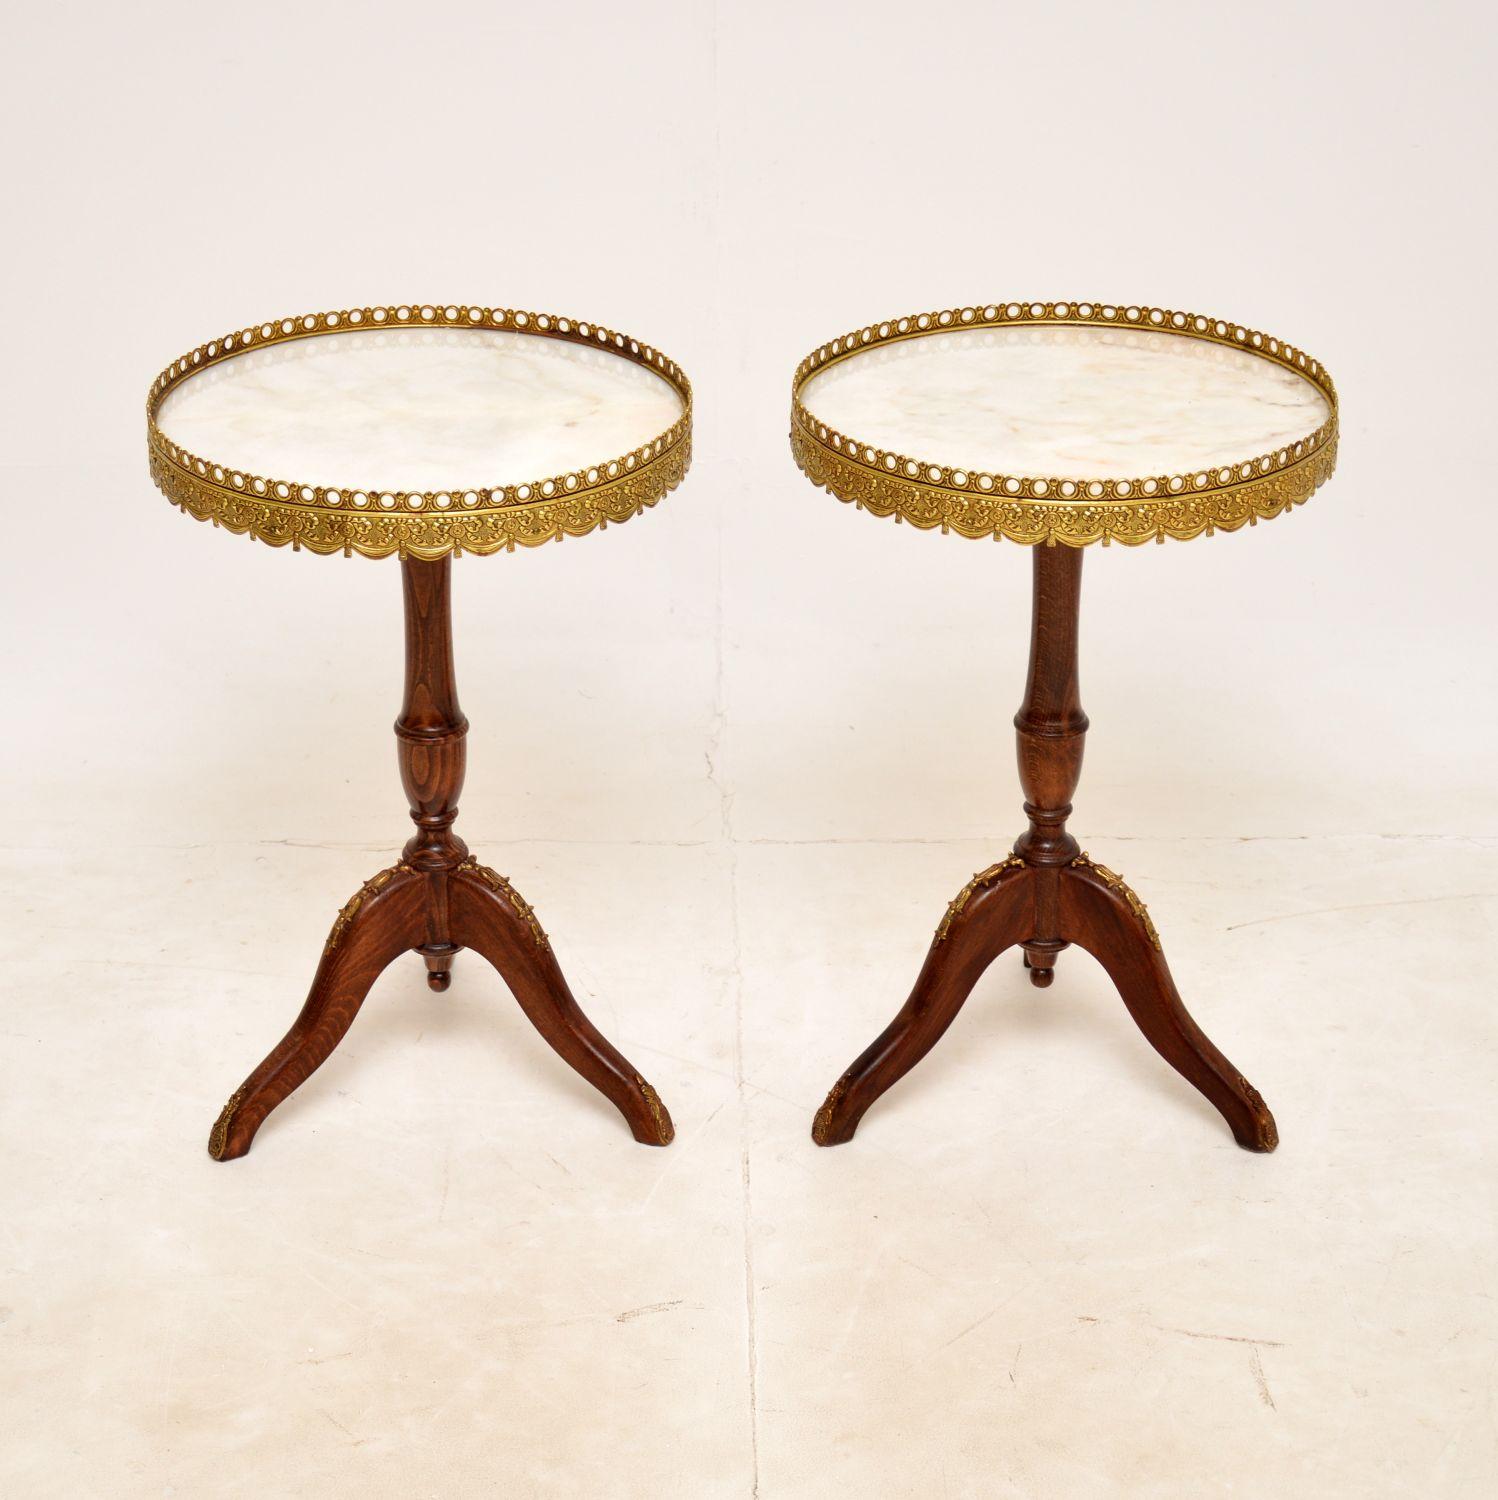 A stunning and very well made pair of antique marble top wine tables in the French style and dating from around the 1930-50’s.

The quality is exceptional, and they are a very useful size. The frames are solid wood, with beautiful gilt metal